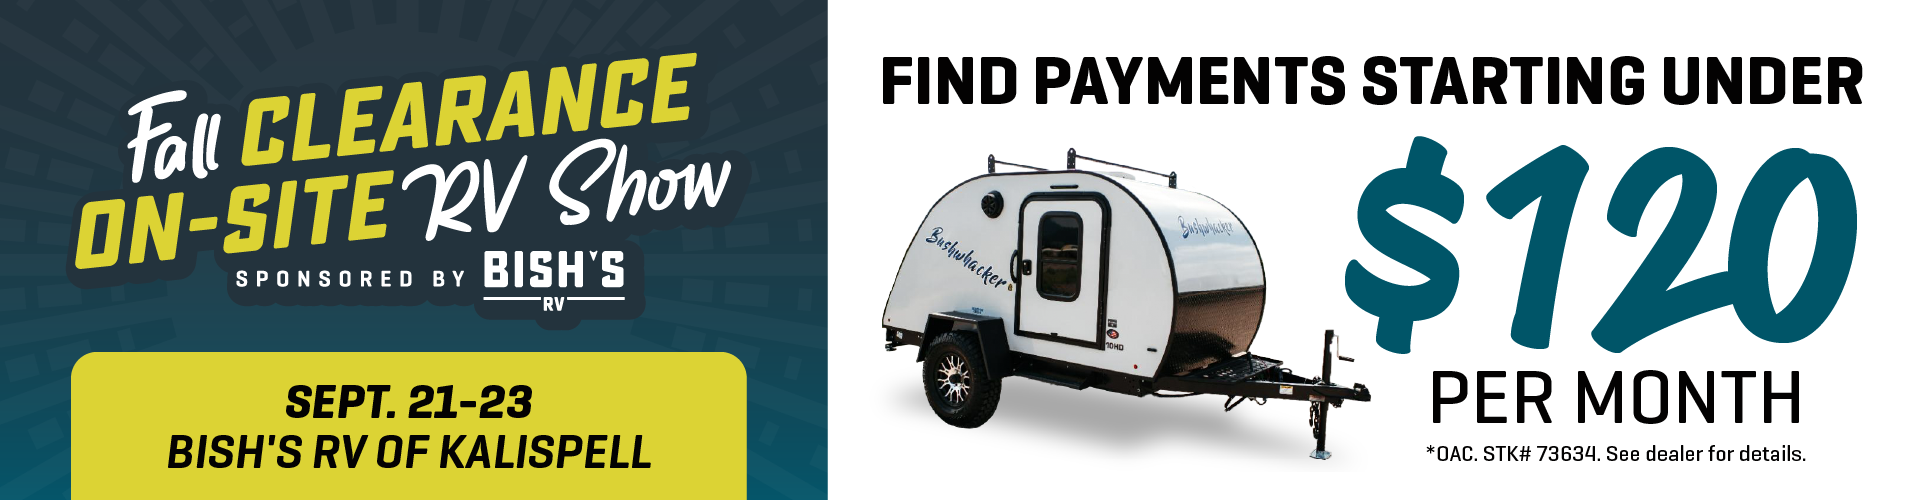 Fall Clearance On-Site RV Show - Sept. 21-23, 2023 - Bish's RV of Kalispell